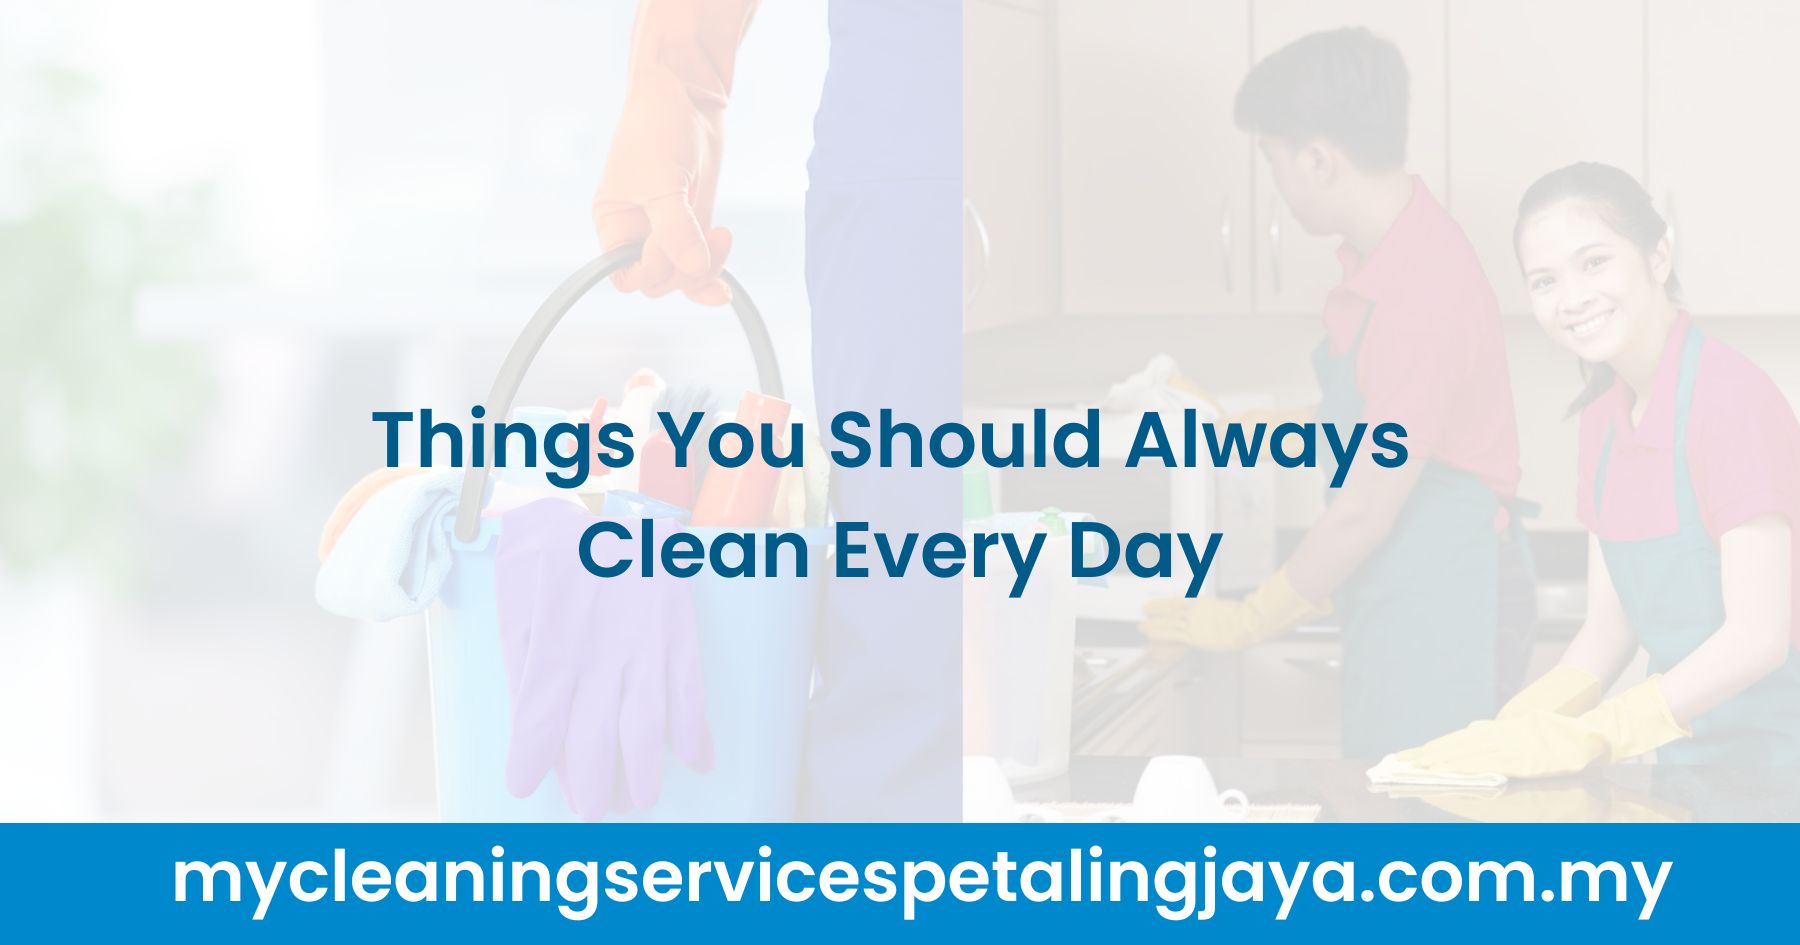 Things You Should Always Clean Every Day